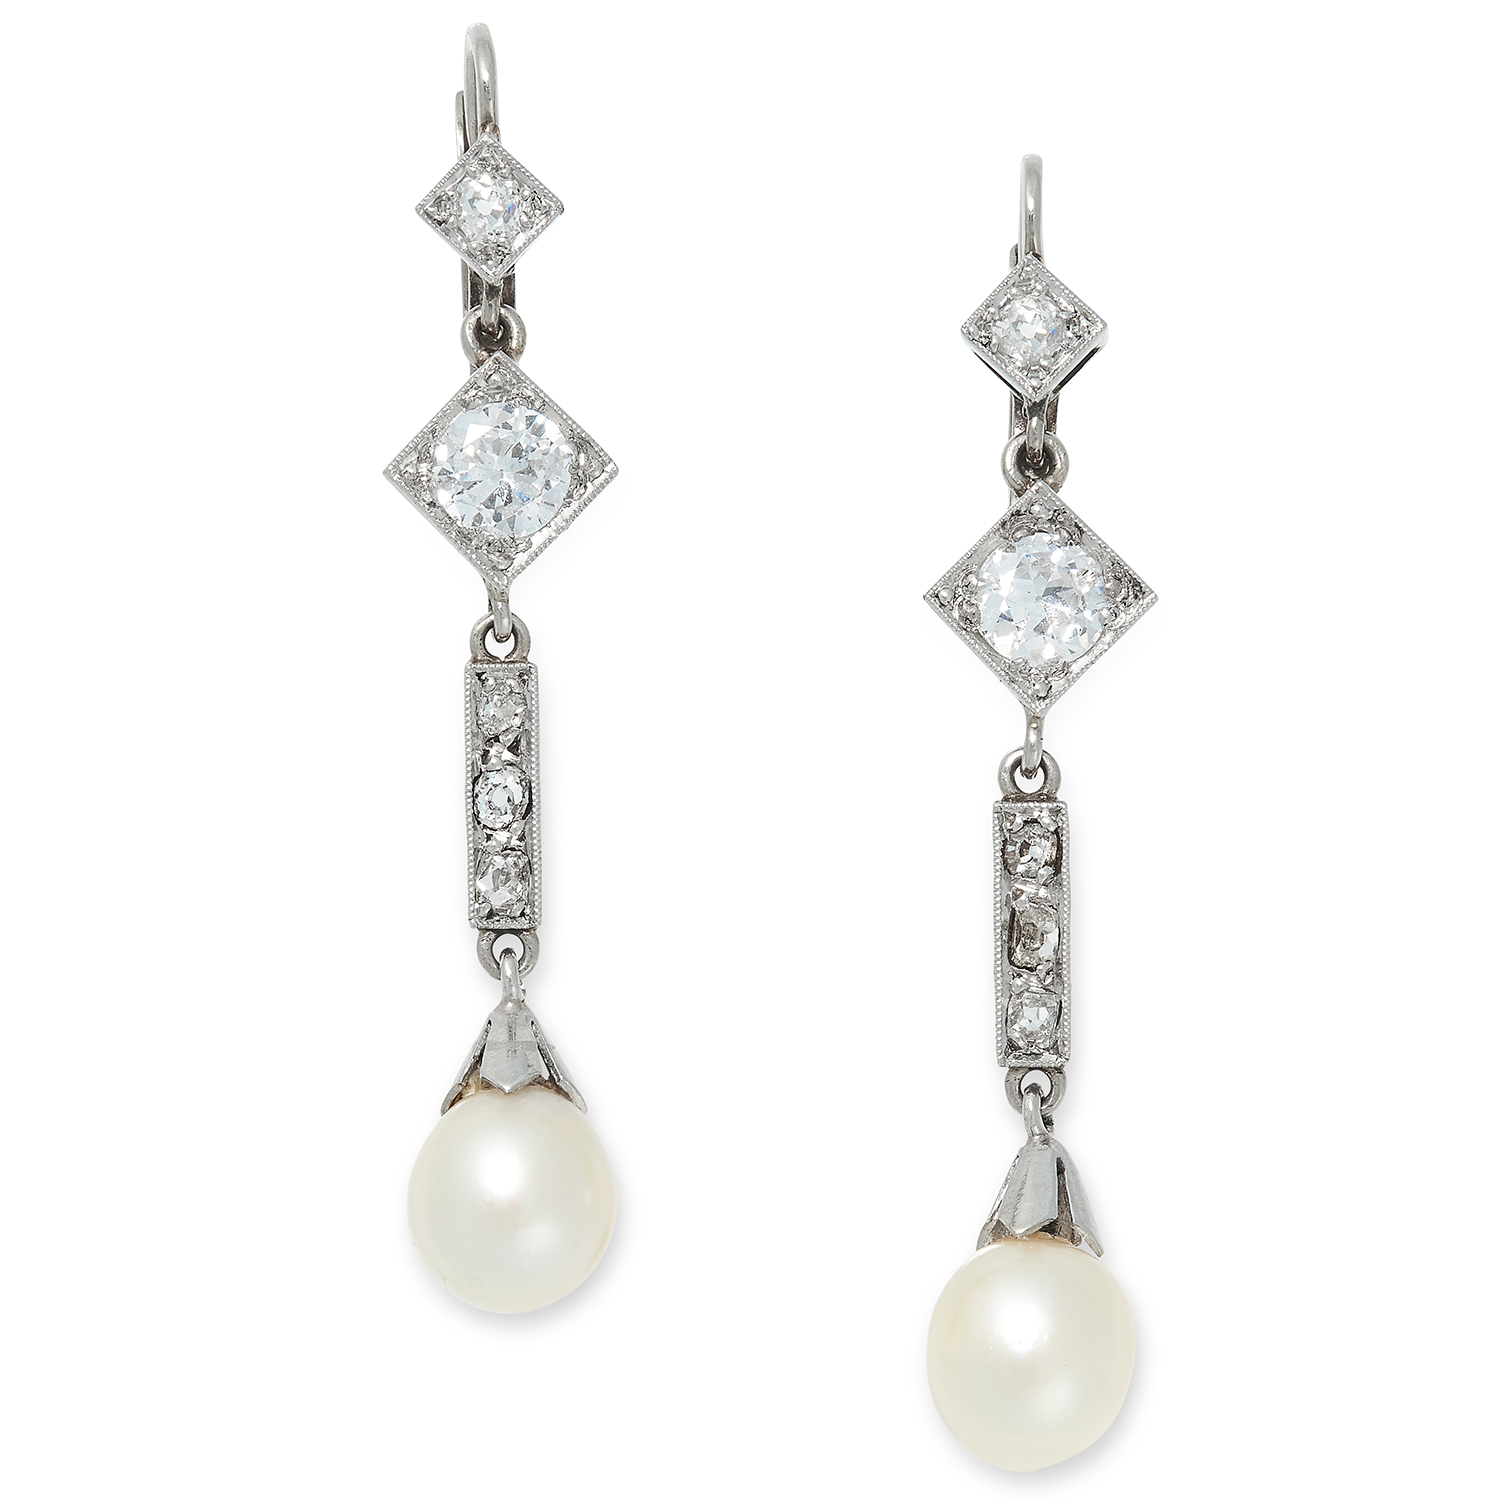 A PAIR OF ANTIQUE NATURAL PEARL AND DIAMOND EARRINGS each set with a natural pearl of 7.6mm and 7.